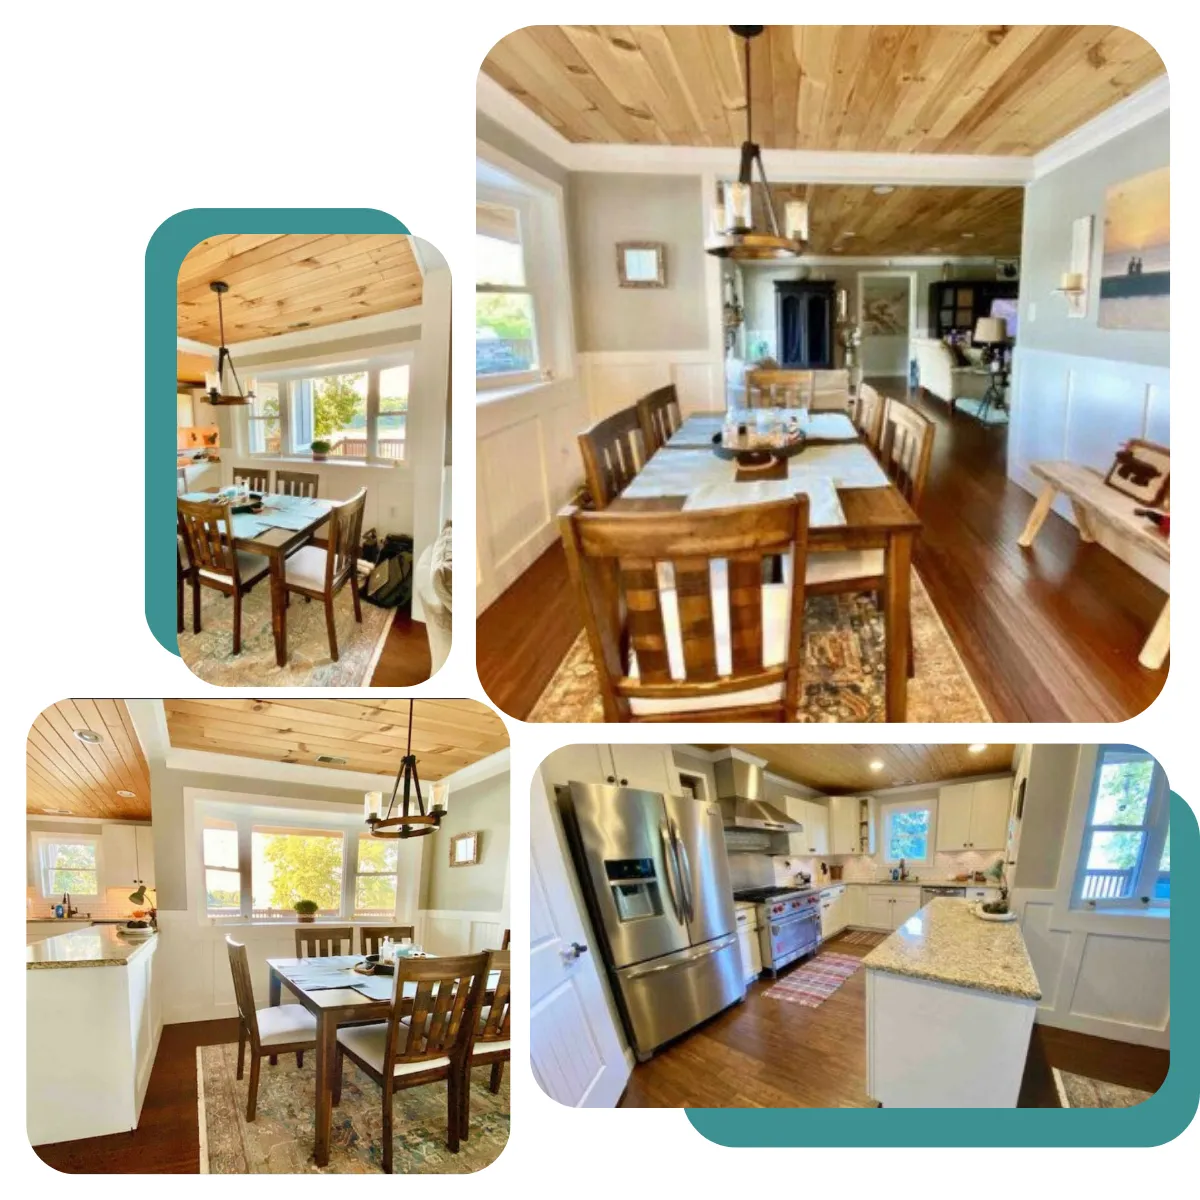 At Wylie Lakefront Retreat, cook in a well-equipped kitchen and enjoy meals on the deck or indoors for cozy gatherings.